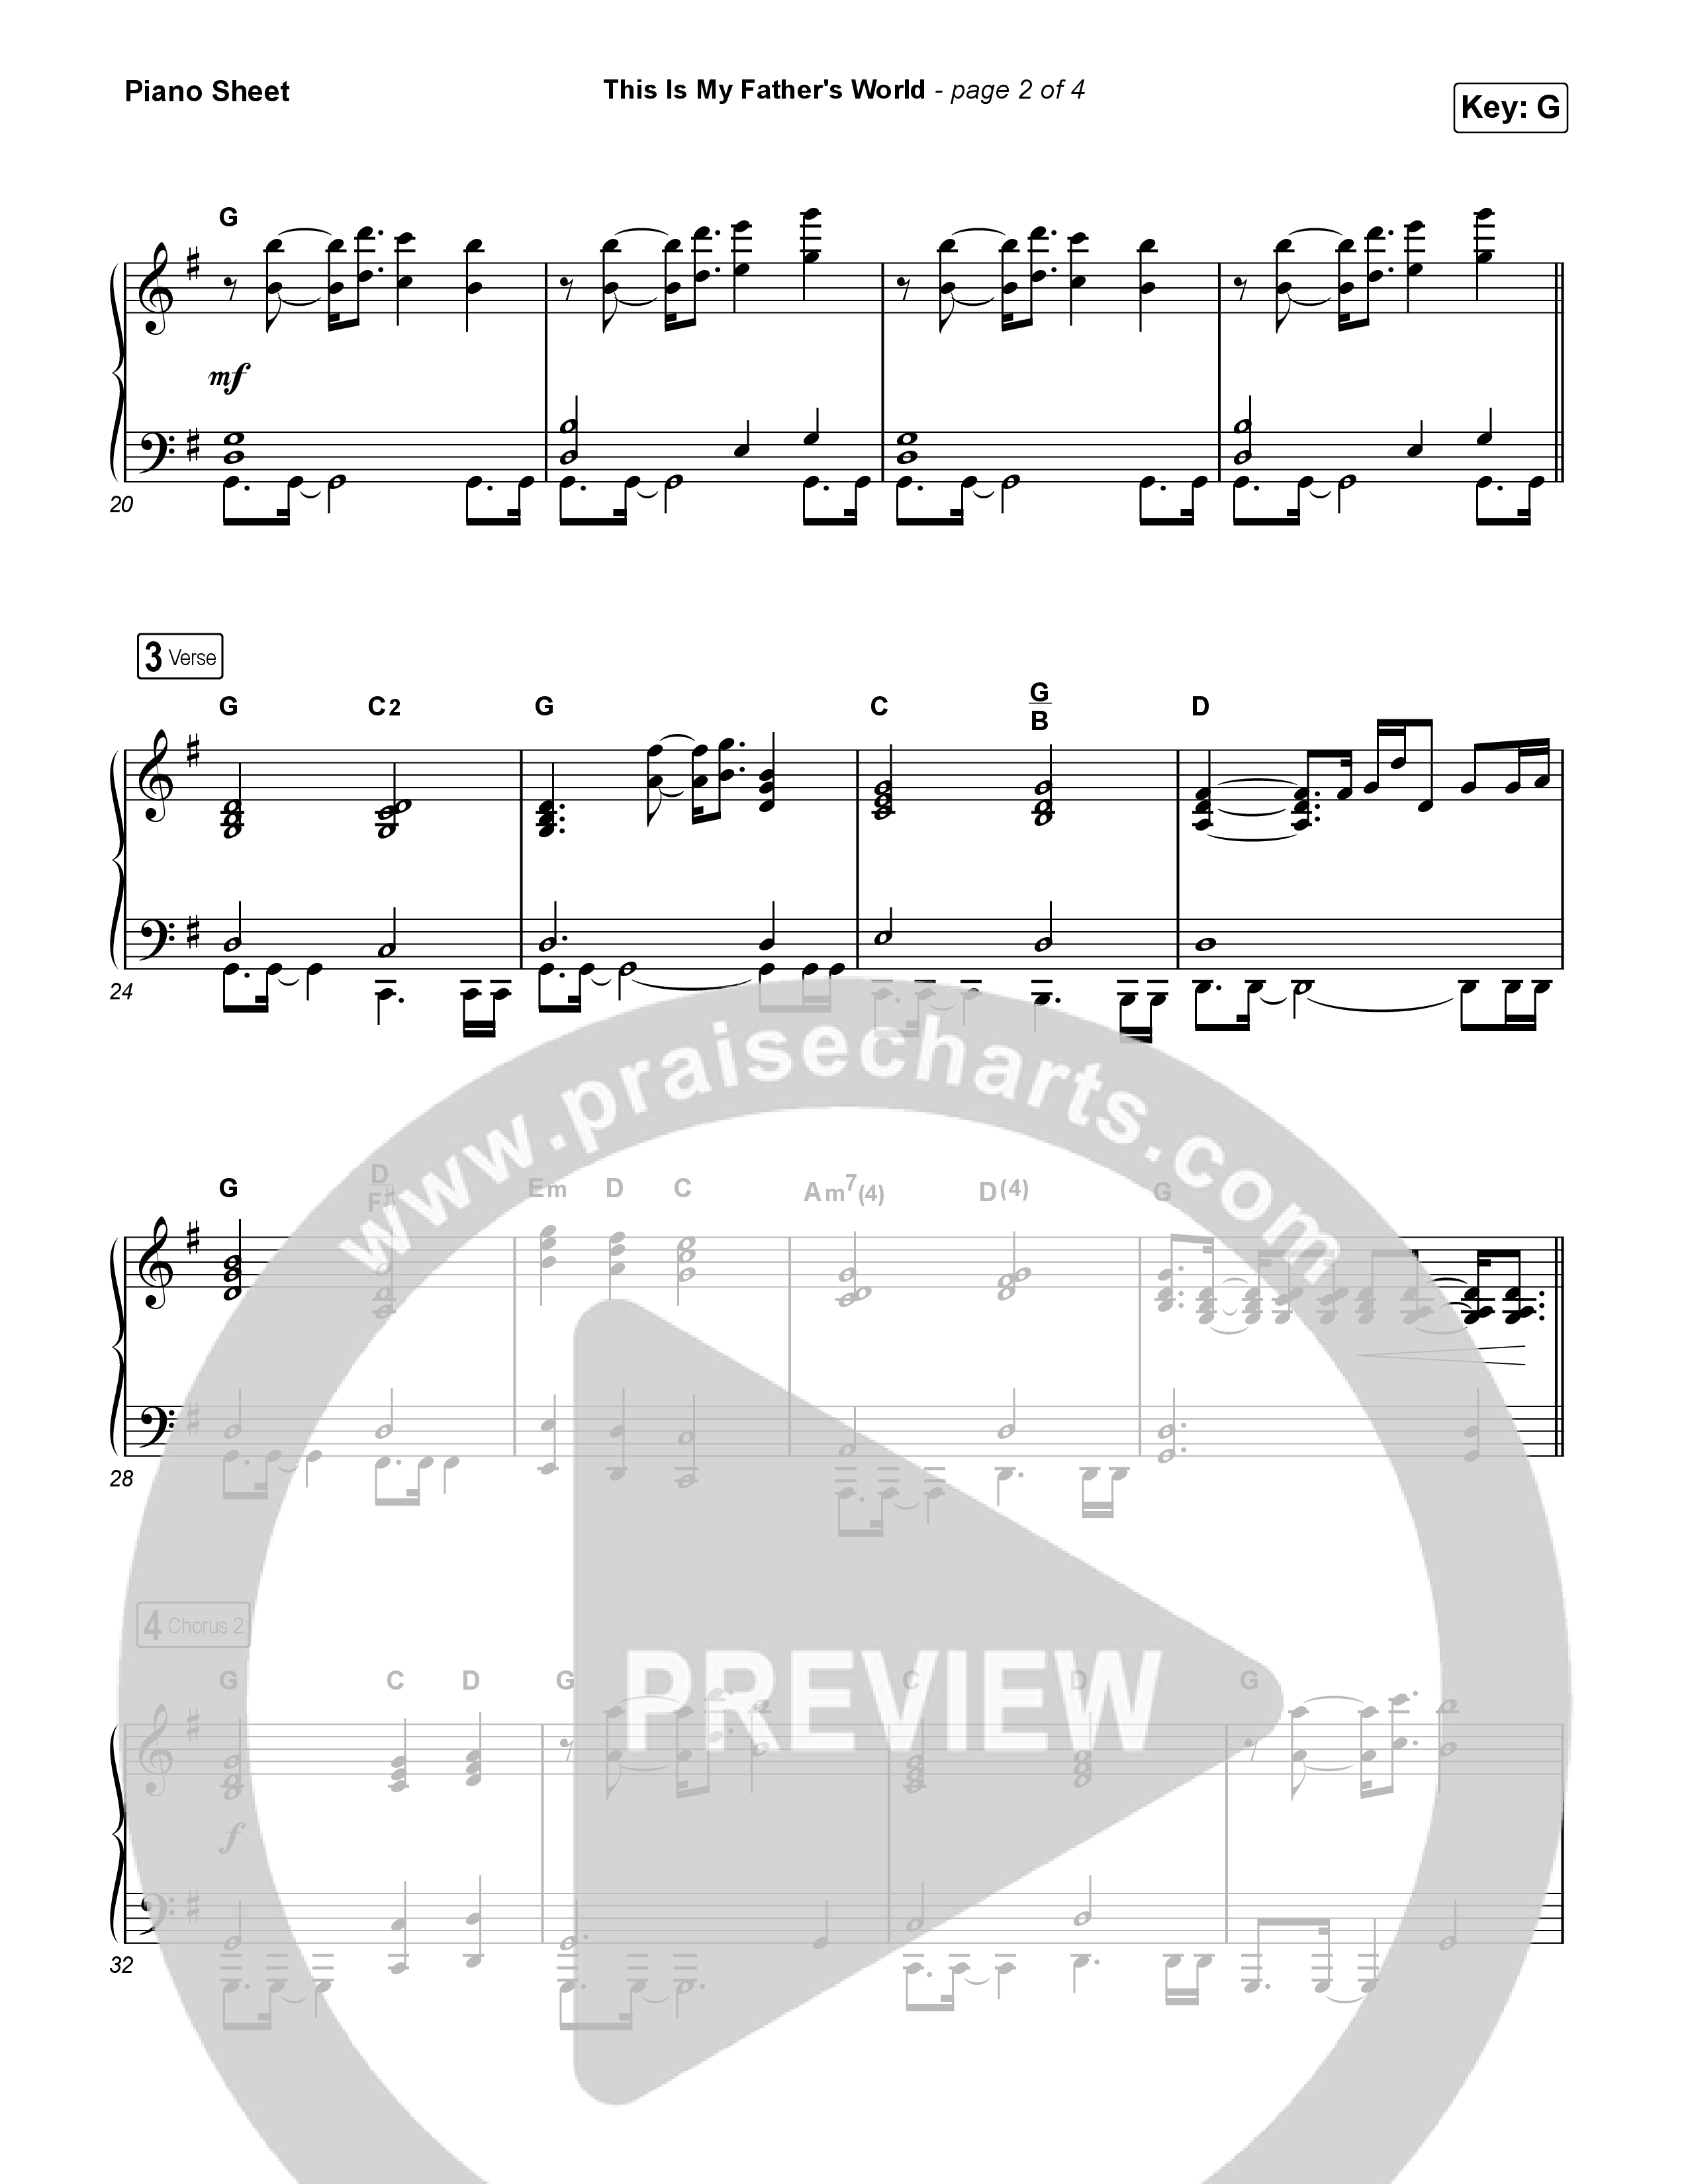 This Is My Father’s World Piano Sheet (The Worship Initiative)